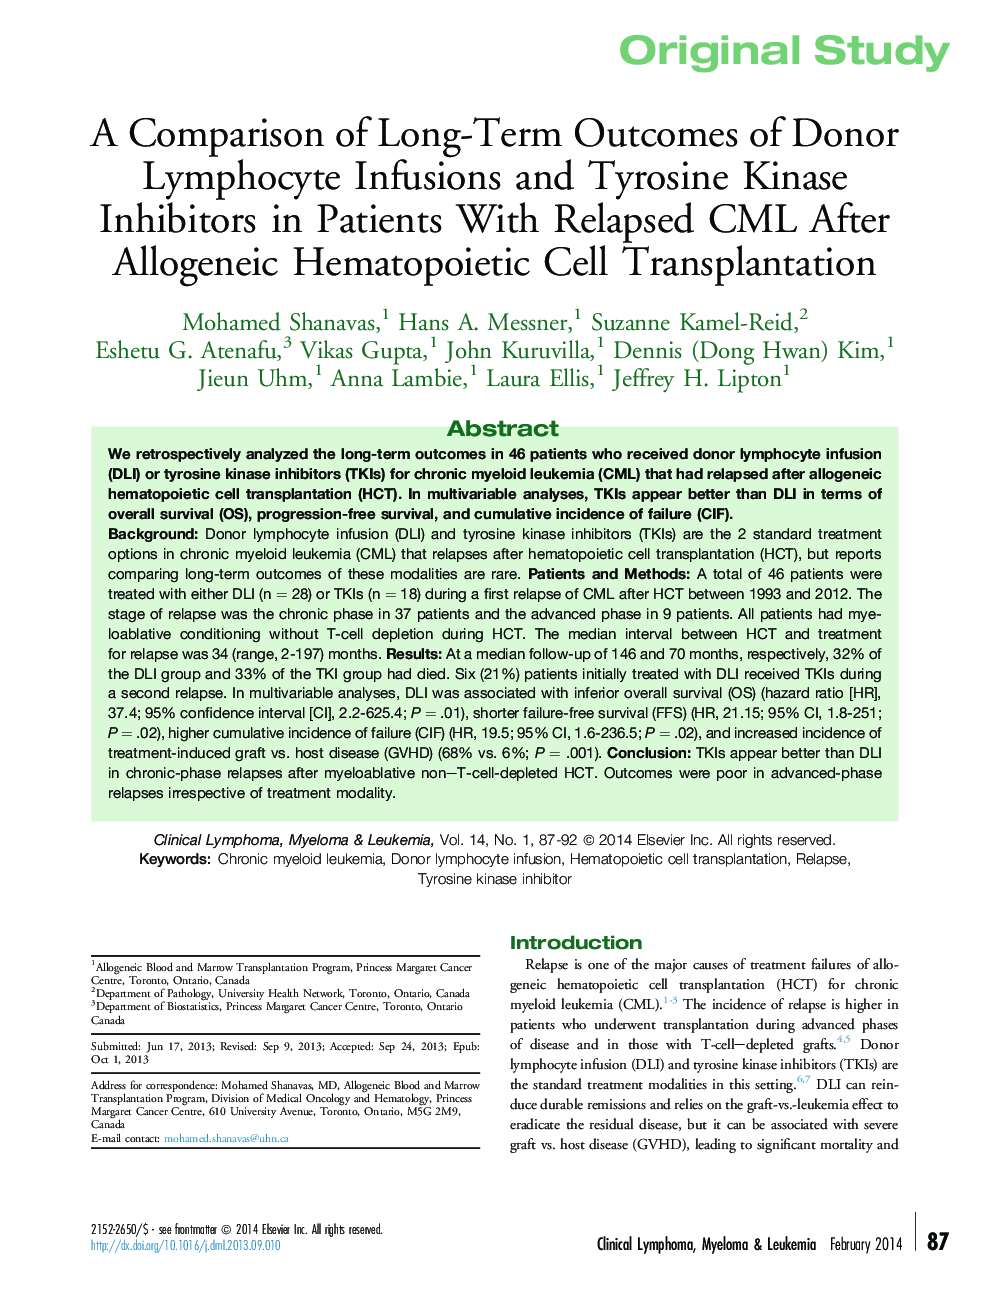 A Comparison of Long-Term Outcomes of Donor Lymphocyte Infusions and Tyrosine Kinase Inhibitors in Patients With Relapsed CML After Allogeneic Hematopoietic Cell Transplantation